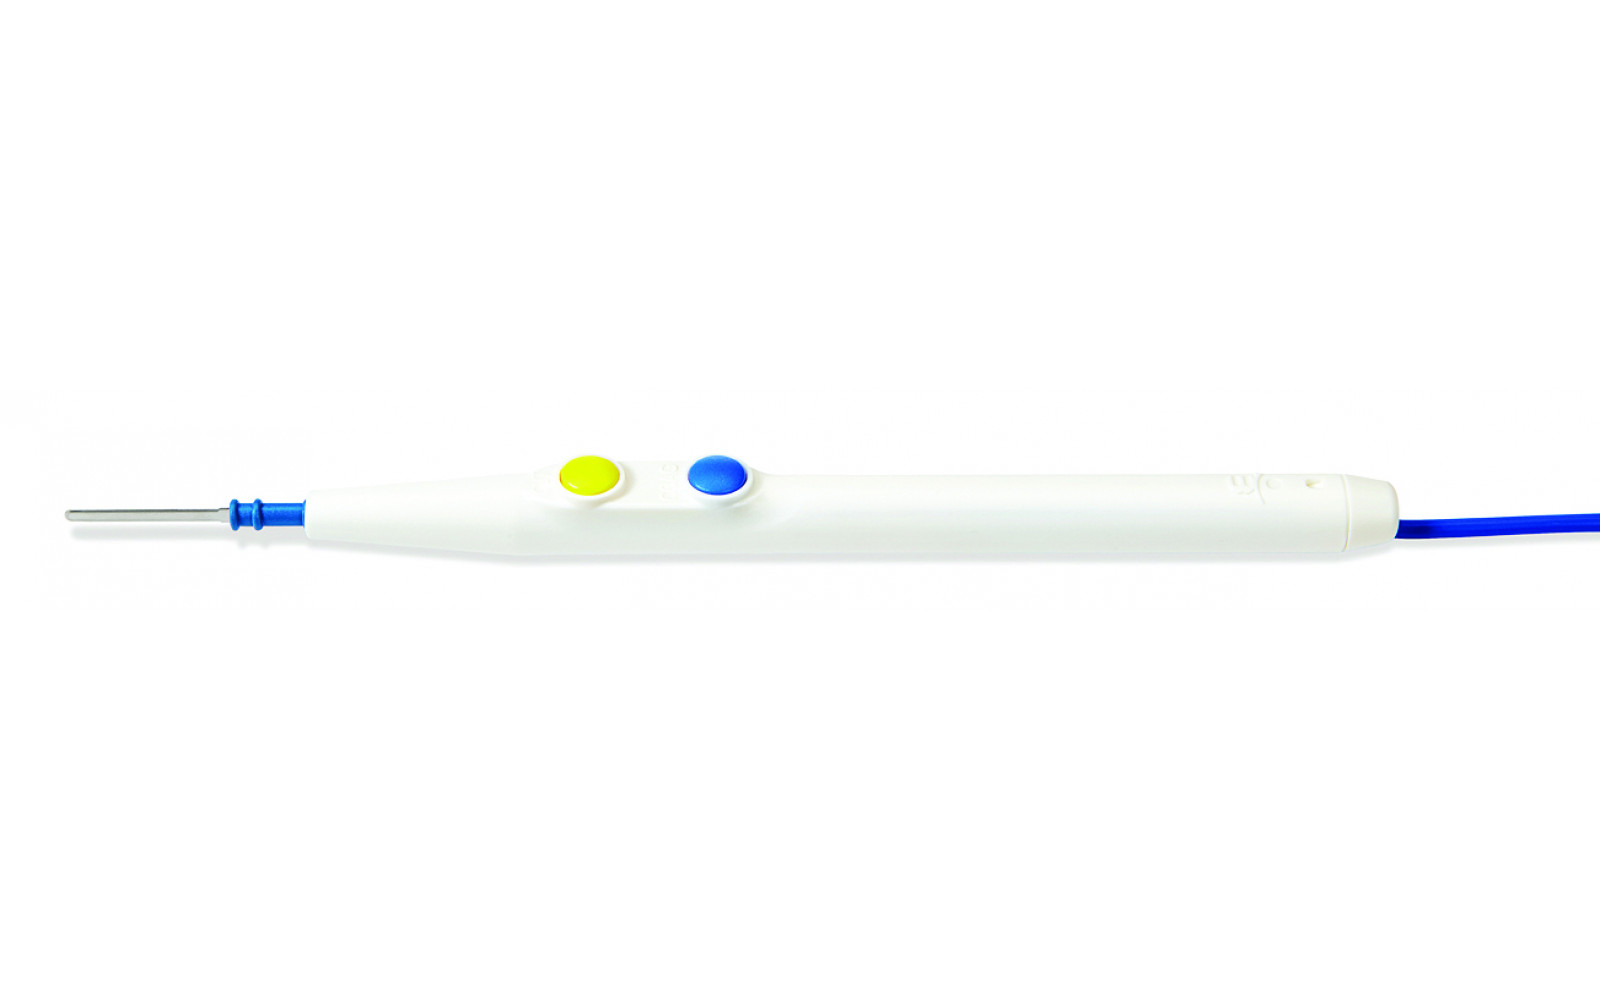 Electrosurgical Pencils with Edge™ Coated Electrodes (Medtronic)